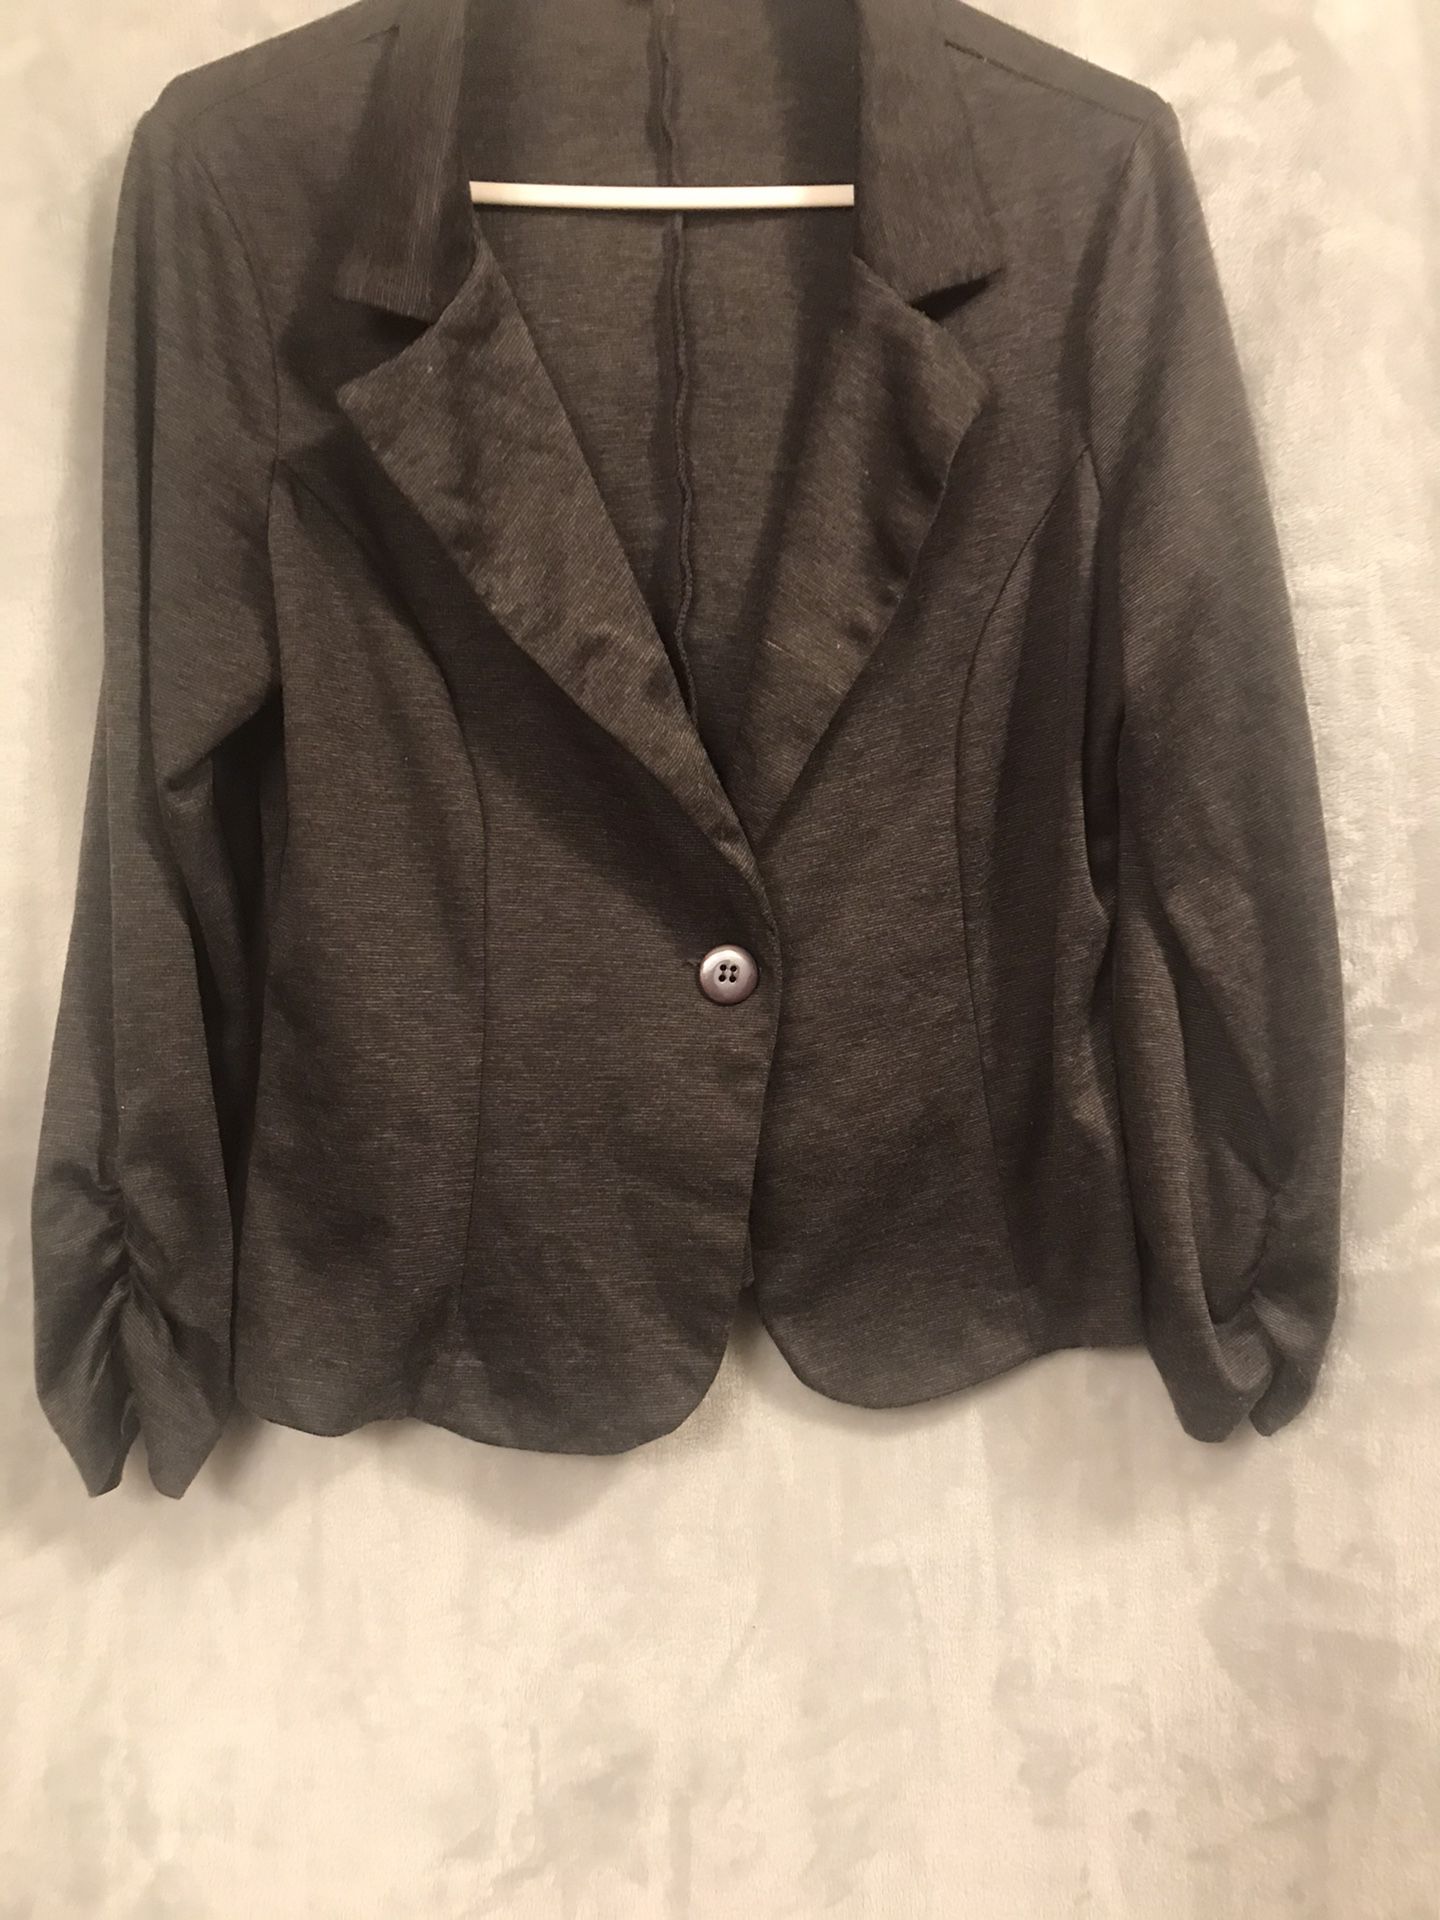 Large gray color cardigan